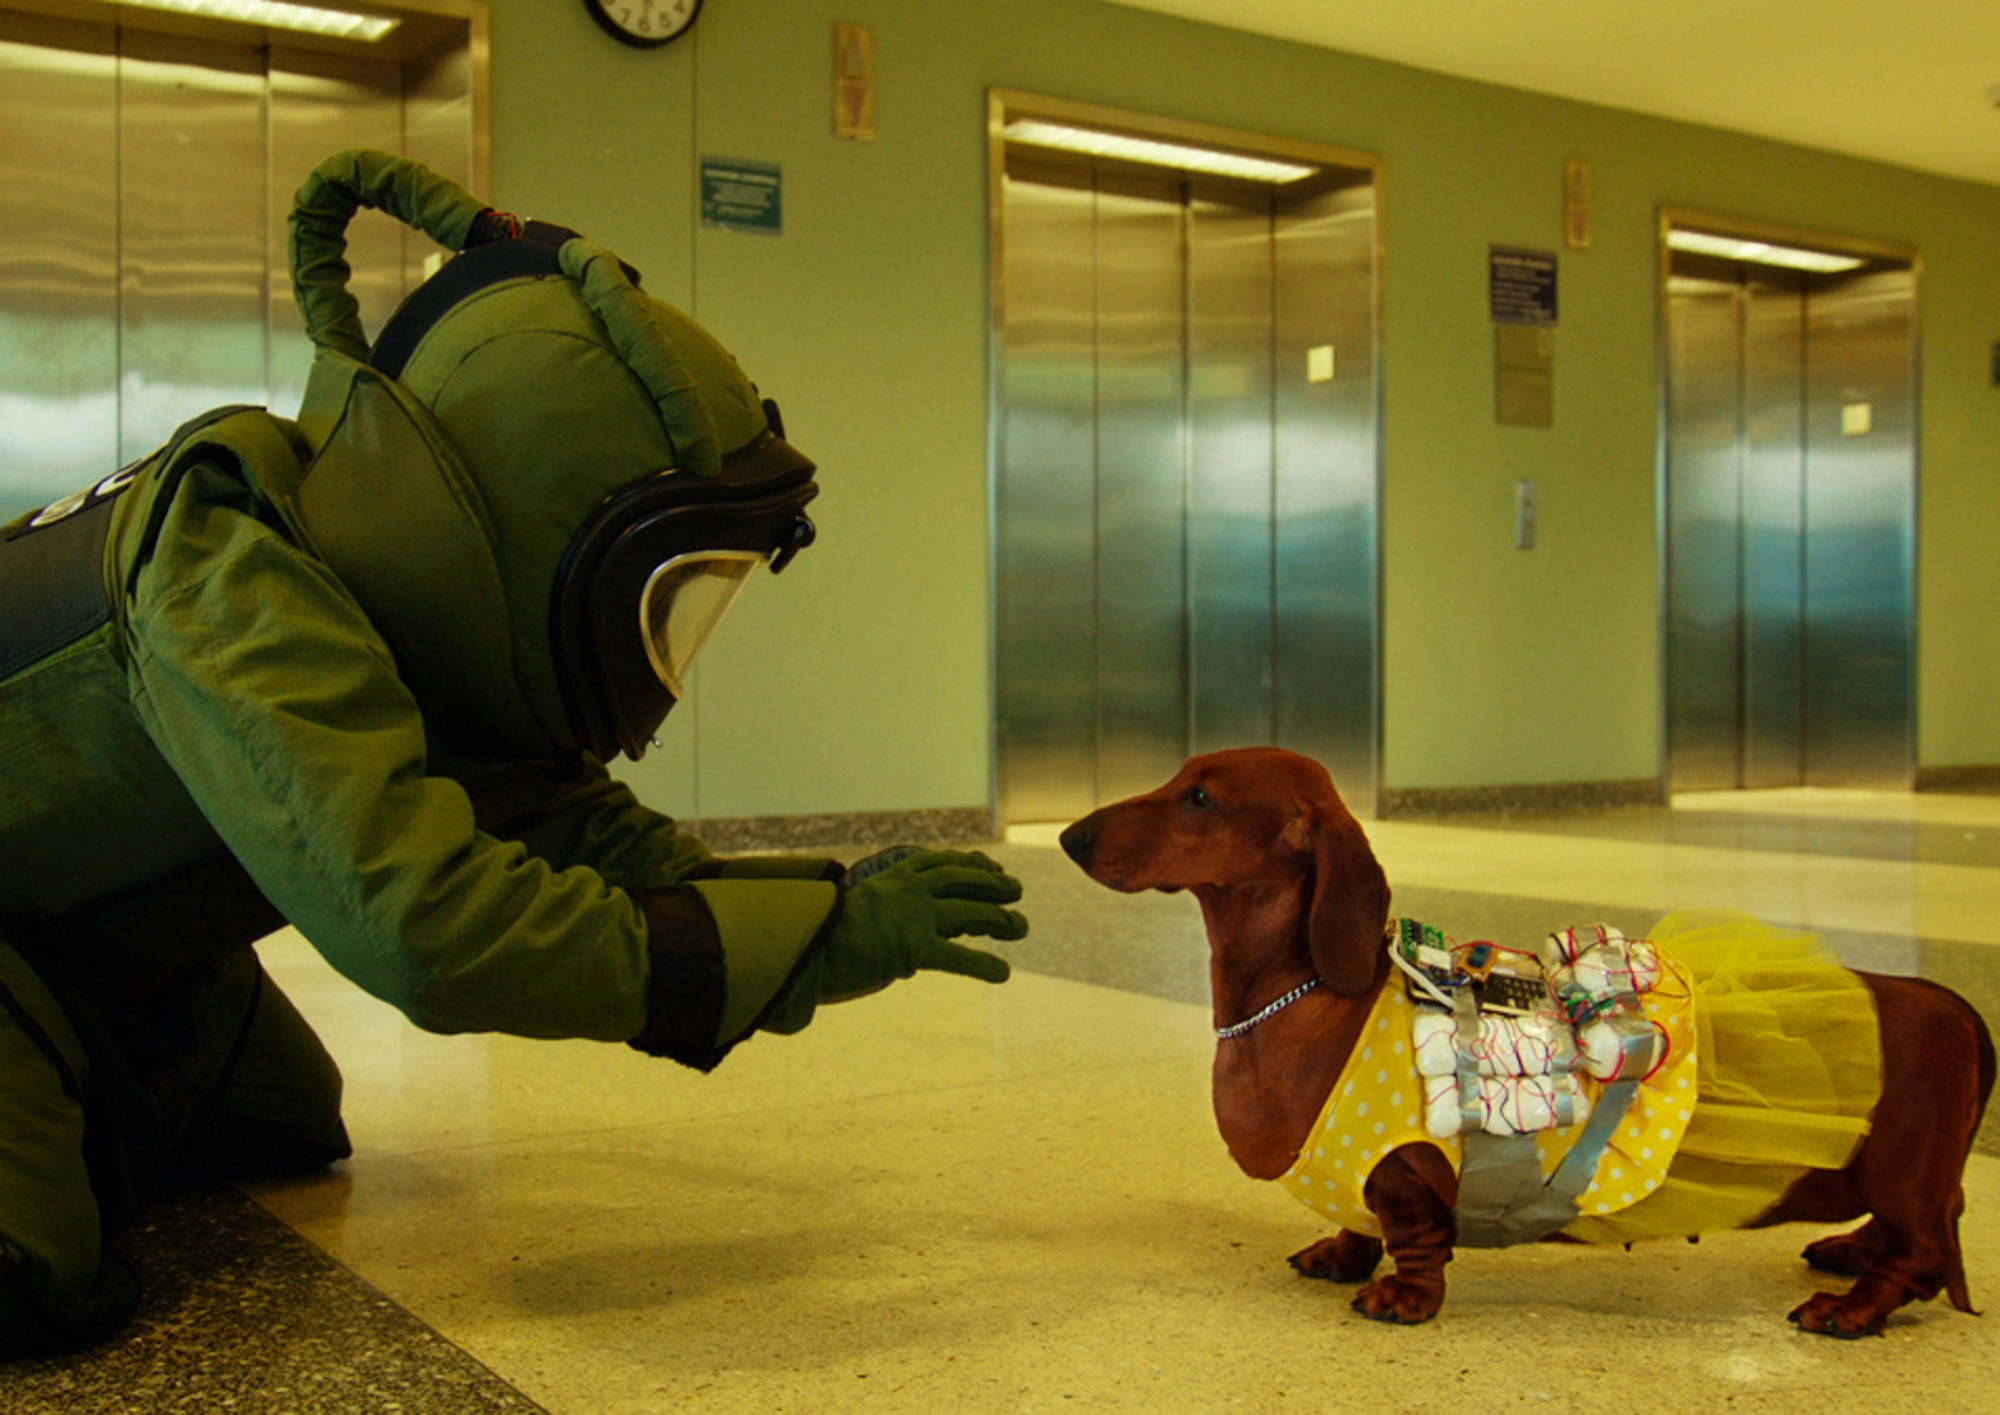 Image from the motion picture Wiener-Dog